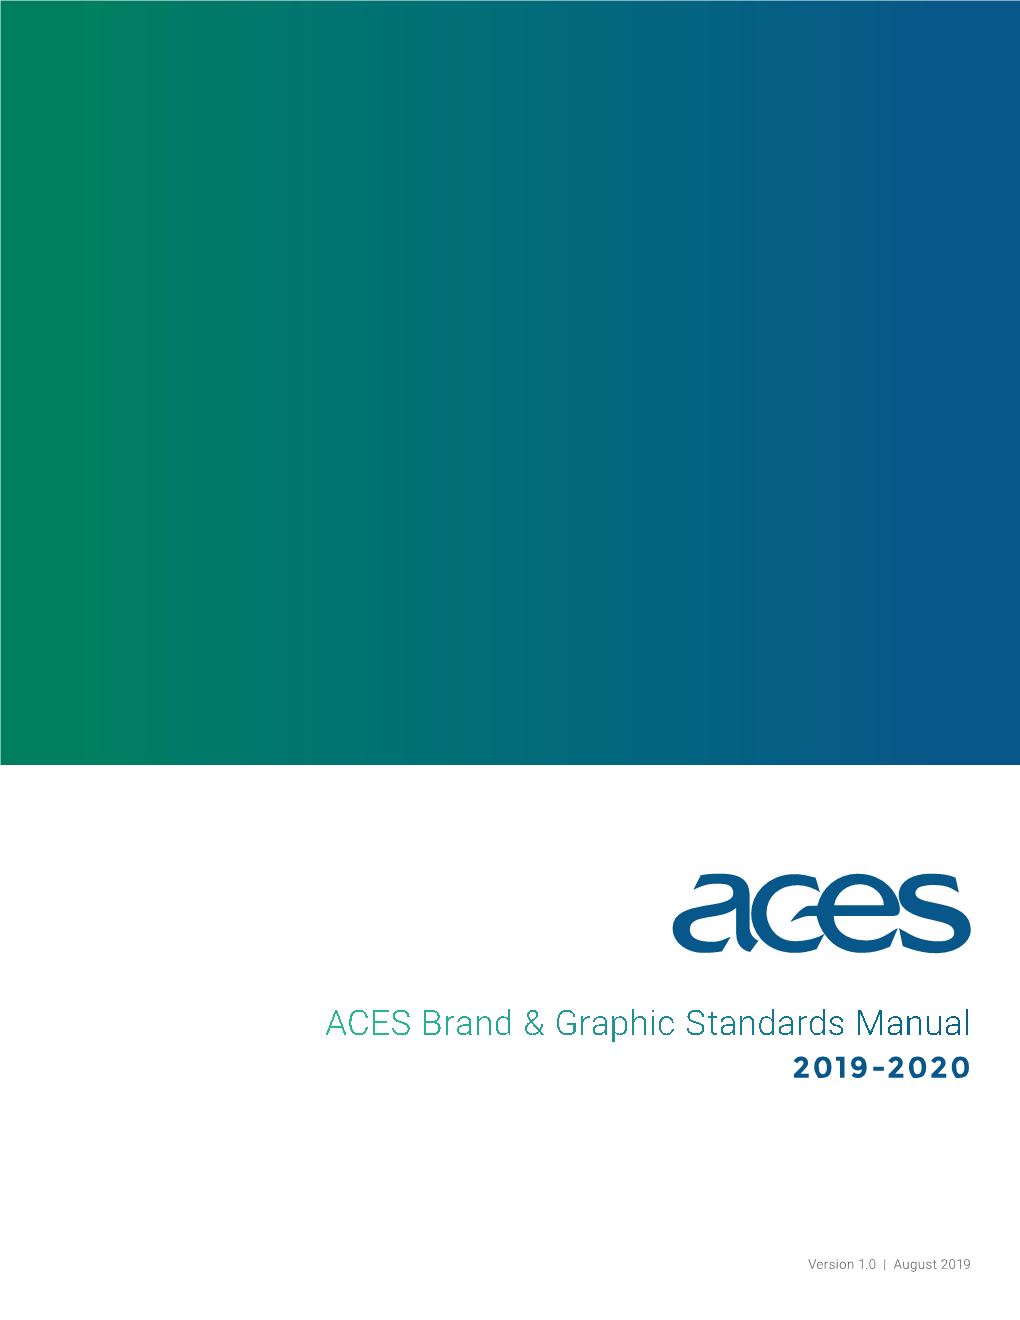 ACES Brand & Graphic Standards Manual